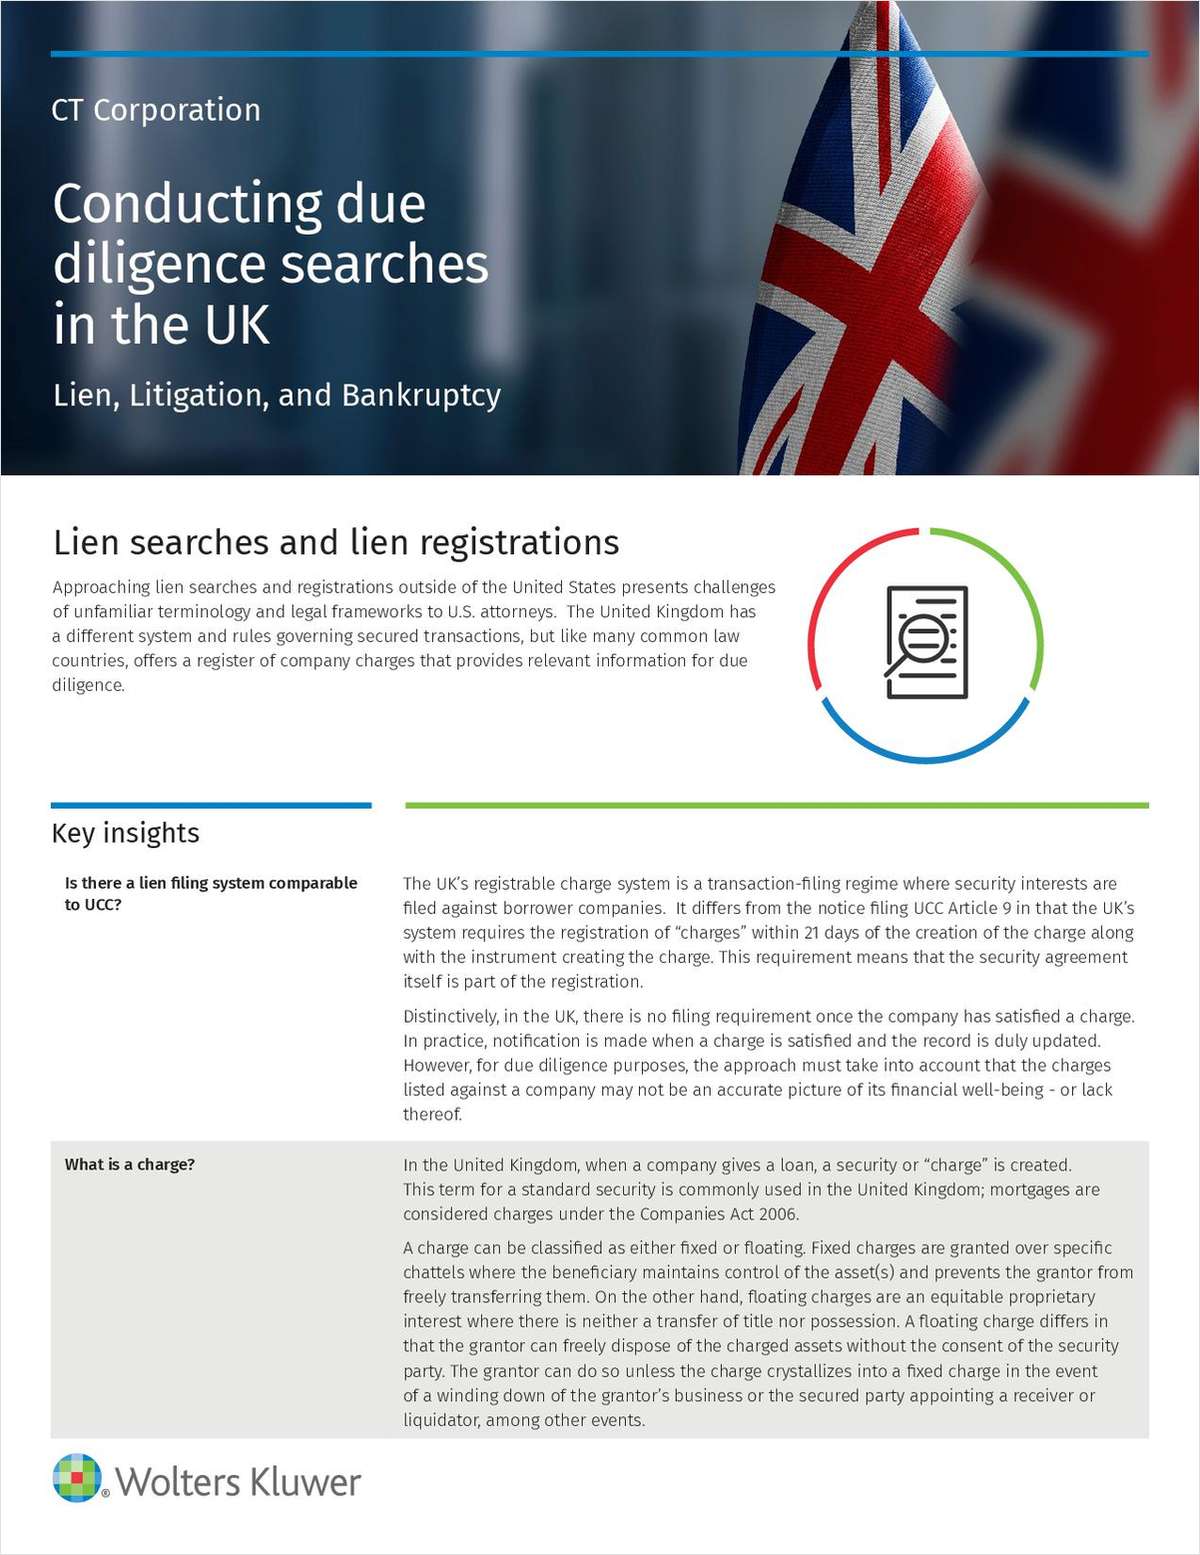 Conducting Due Diligence Searches in the UK: Lien, Litigation and Bankruptcy